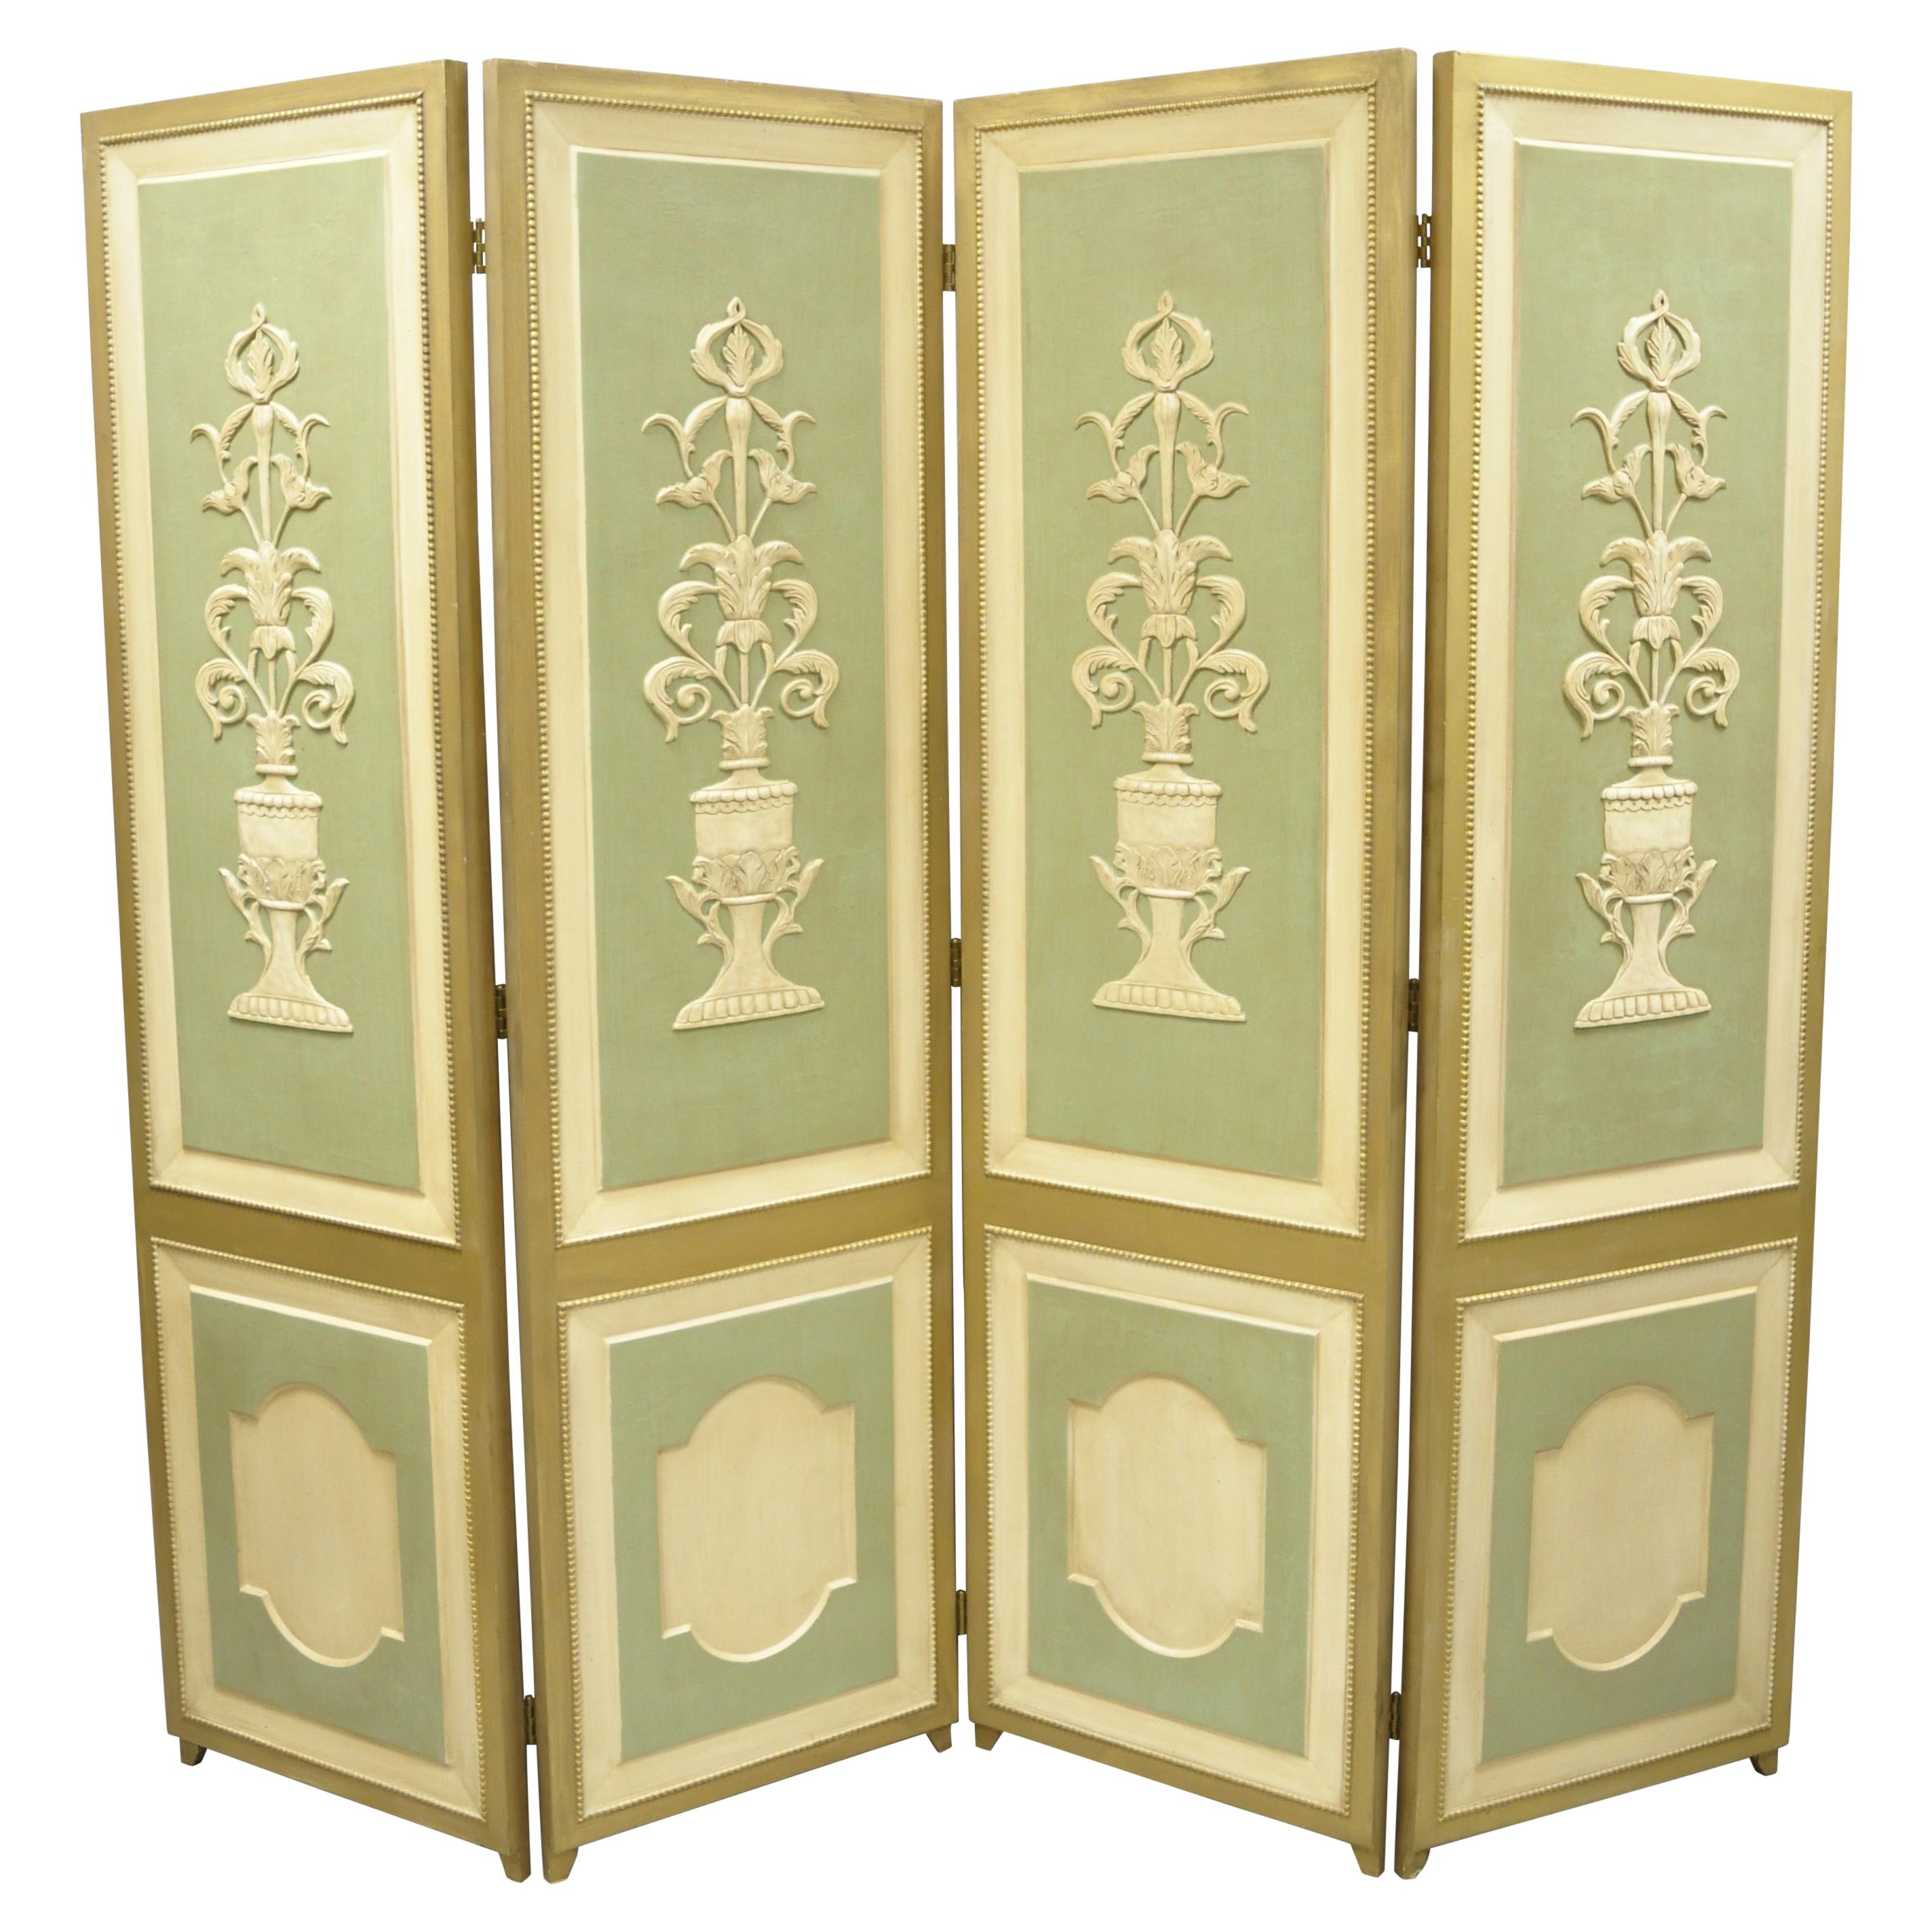 Italian Neoclassical Green Gold 4-Panel Section Carved Urn Flower Folding Screen